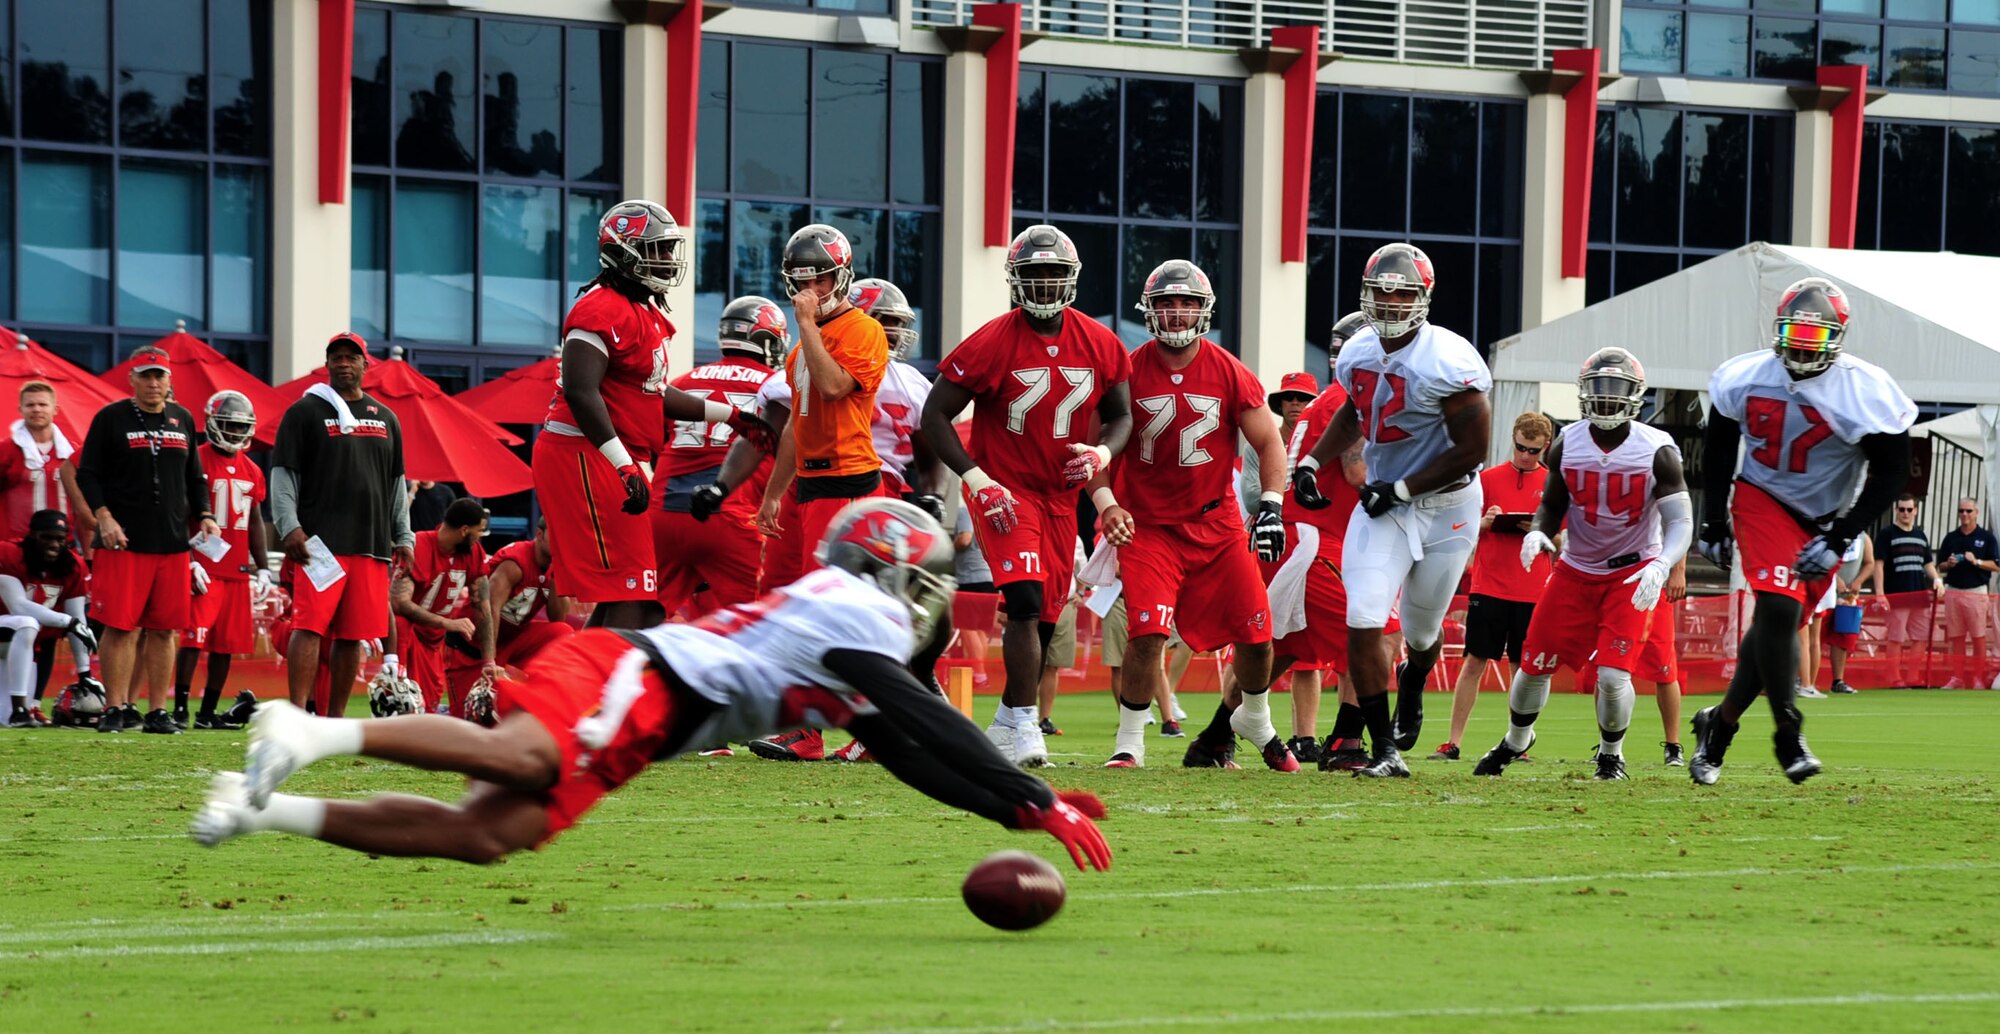 Players at the 2016 Tampa Bay Buccaneers Training camp rush towards a player after he dives for a catch July 29, 2016 at the Raymond James Stadium in Tampa, Fla. The players spent most of their morning running drills such as passing plays and defensive line drills. (U.S Air Force photo by Airman 1st Class Rito Smith) 